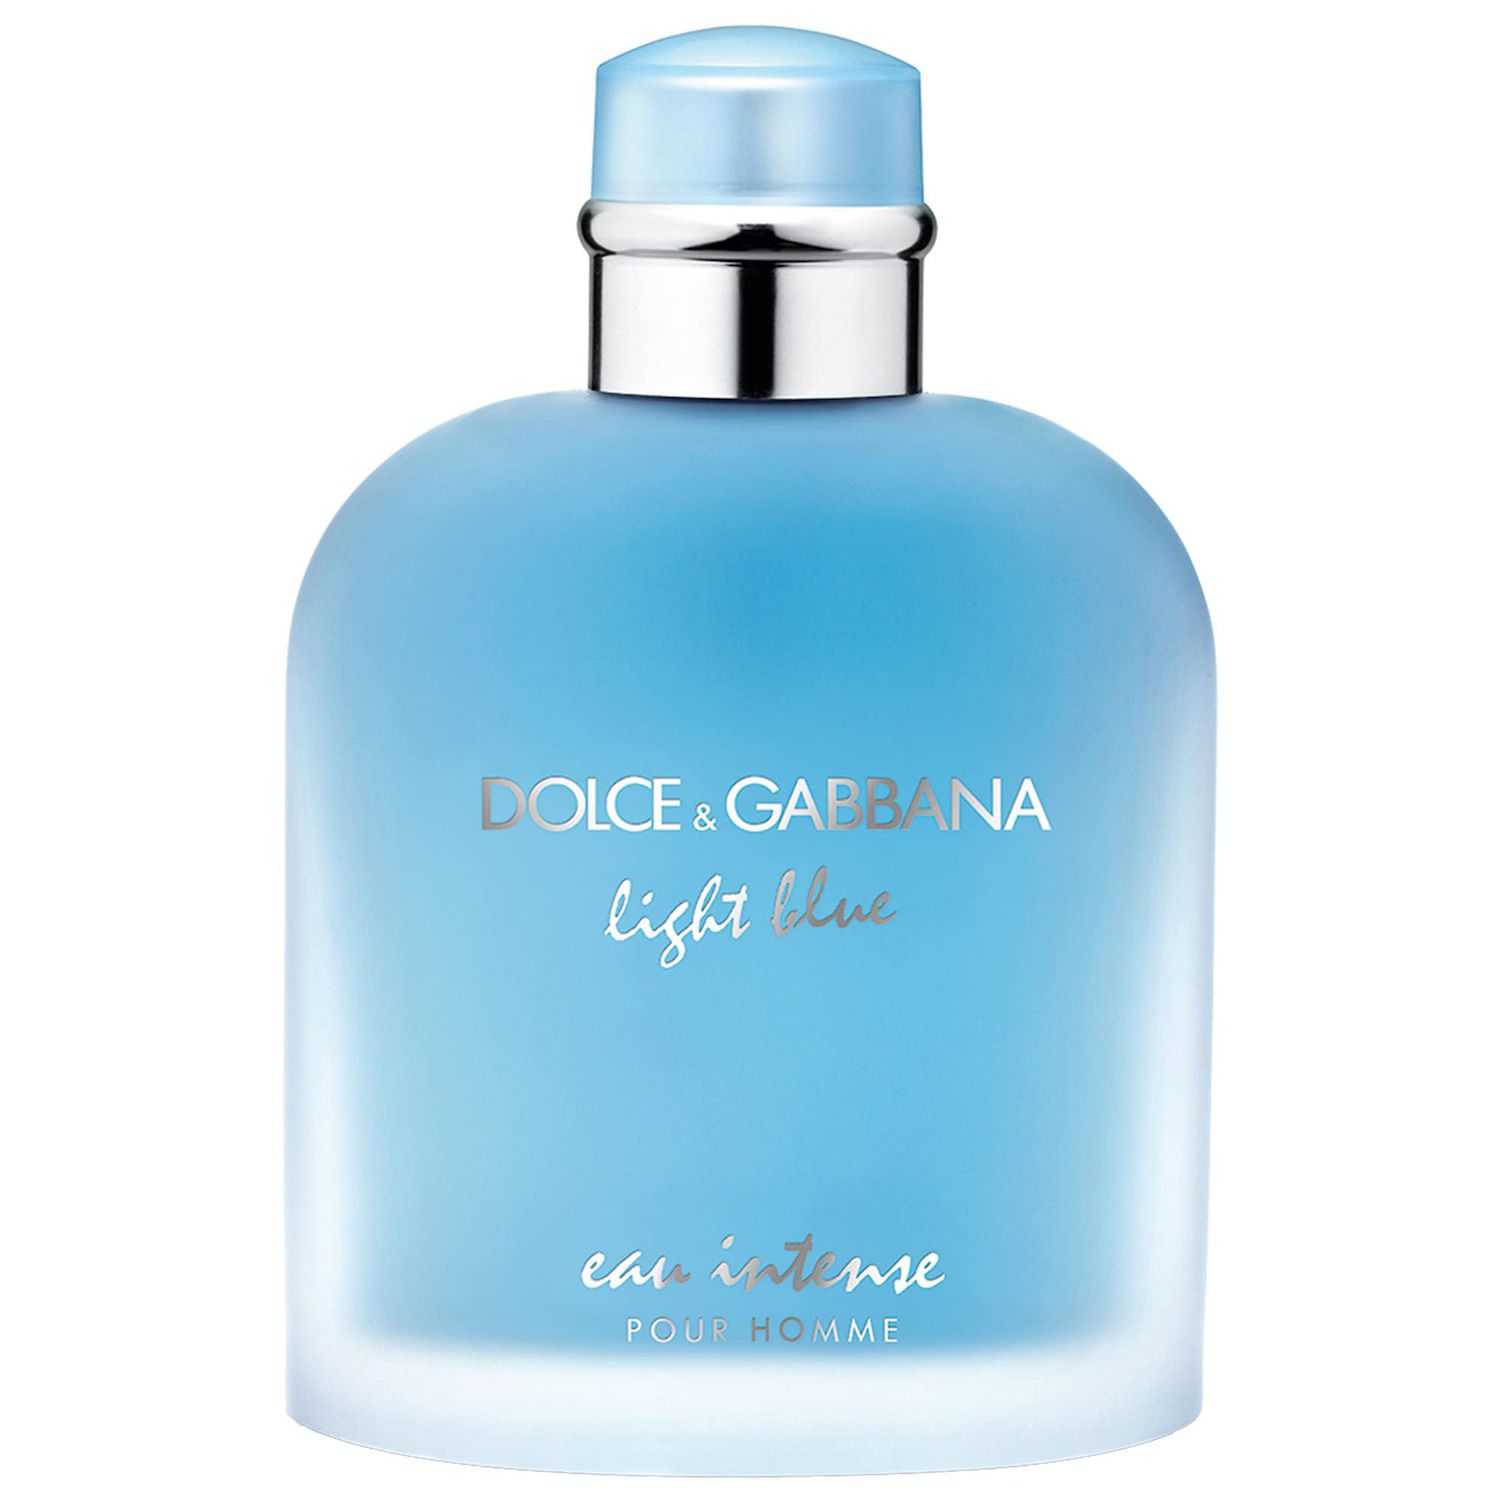 dolce and gabbana mens cologne